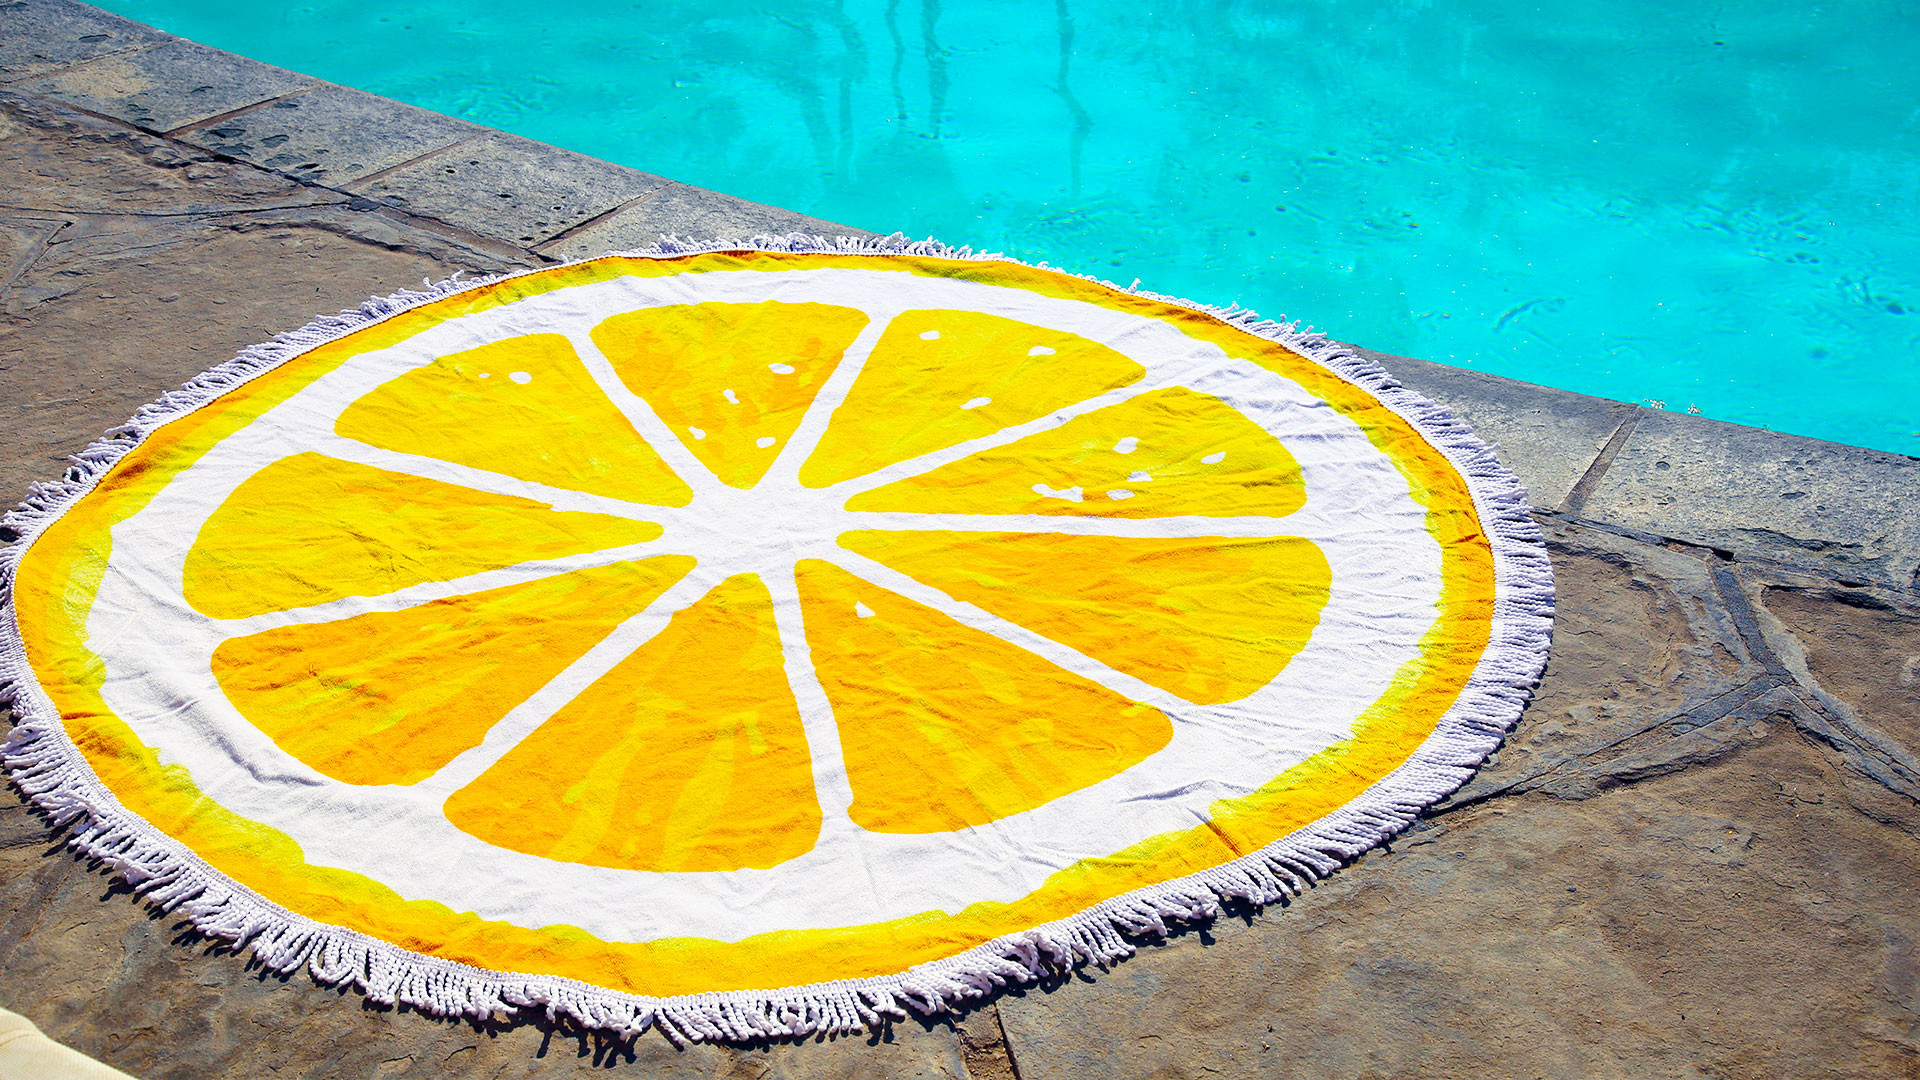 1920x1080 Whether you're laying out, drying off or perfecting your poolside Instagram  pics, a cute towel (like this bright yellow lemon pick) is a pool party  must.